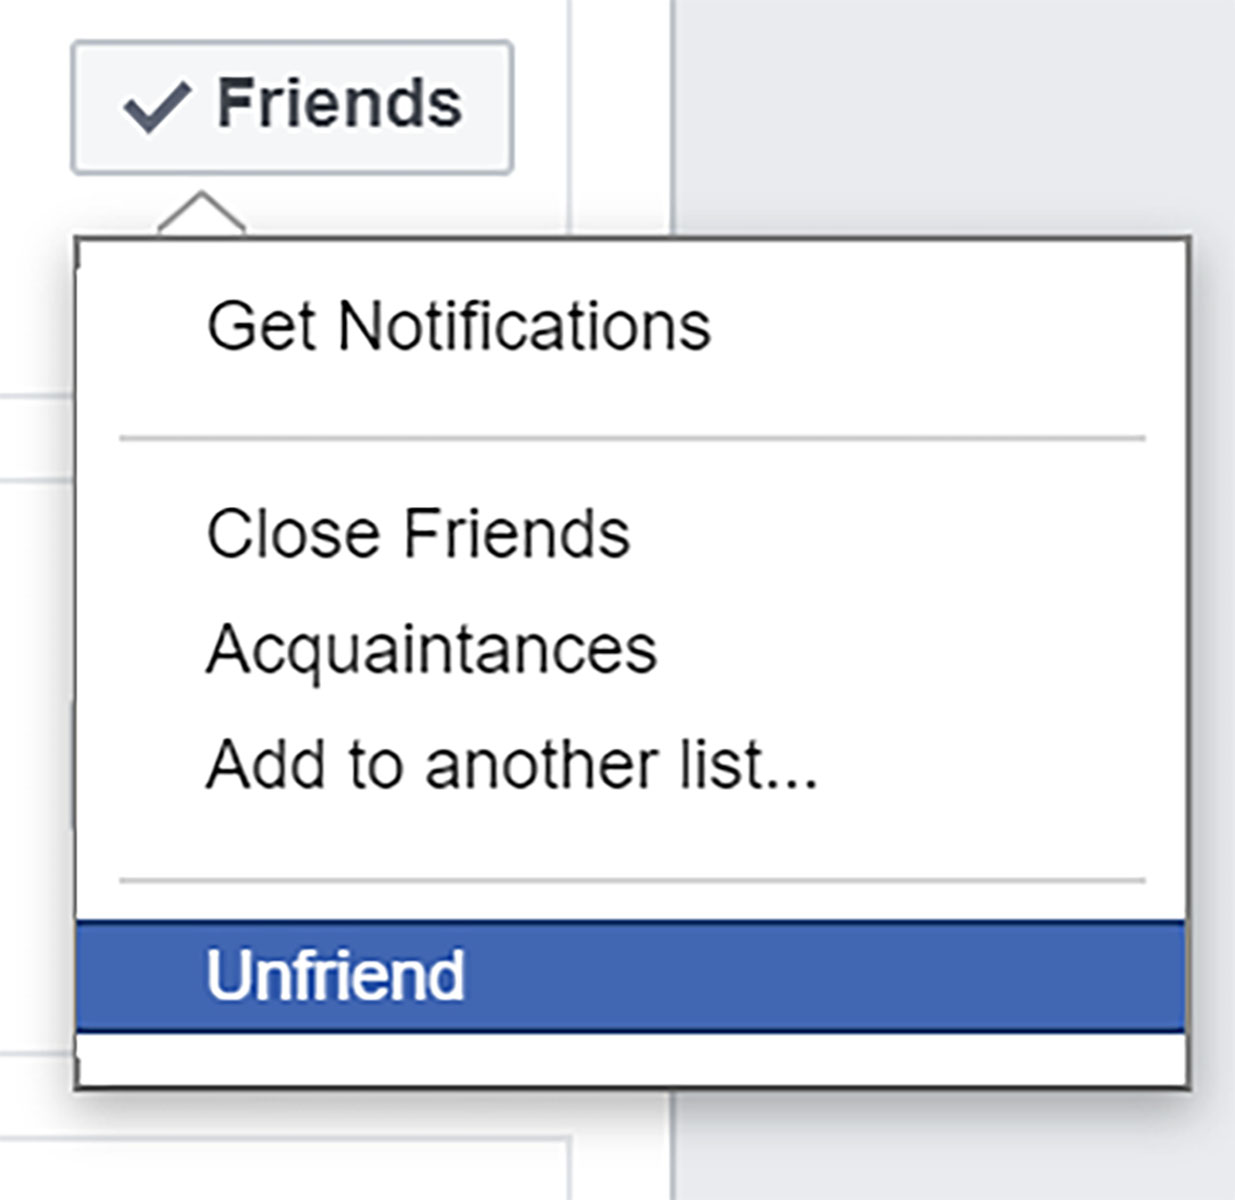 PHOTO: The image is a screenshot from Facebook displaying a drop down menu with Friends at the top. Hovering over 'Friends' releases a drop down menu with the options to Get Notifications Close Friends Acquaintances Add to another list.. Unfriend Promoting NUD, the Unfriend option is highlighted Photo by The Signal reporter Brittany Ballast.